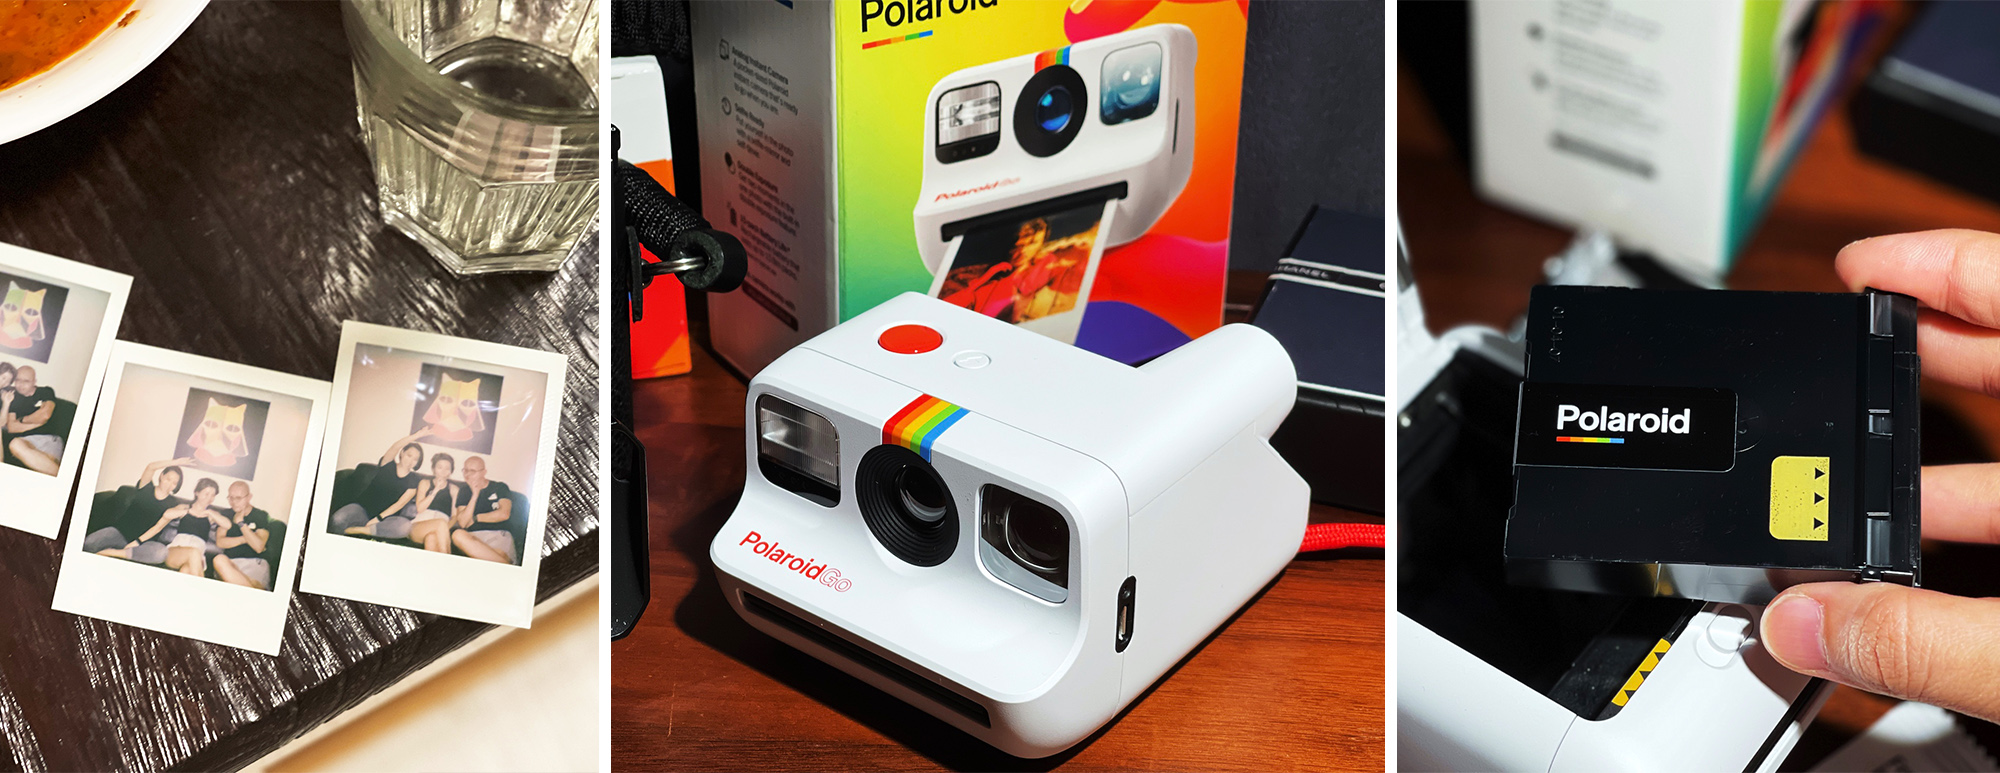 keuken Visa Inloggegevens You're gonna have so much fun with the Polaroid Go — Polaroid's newest and  smallest instant camera